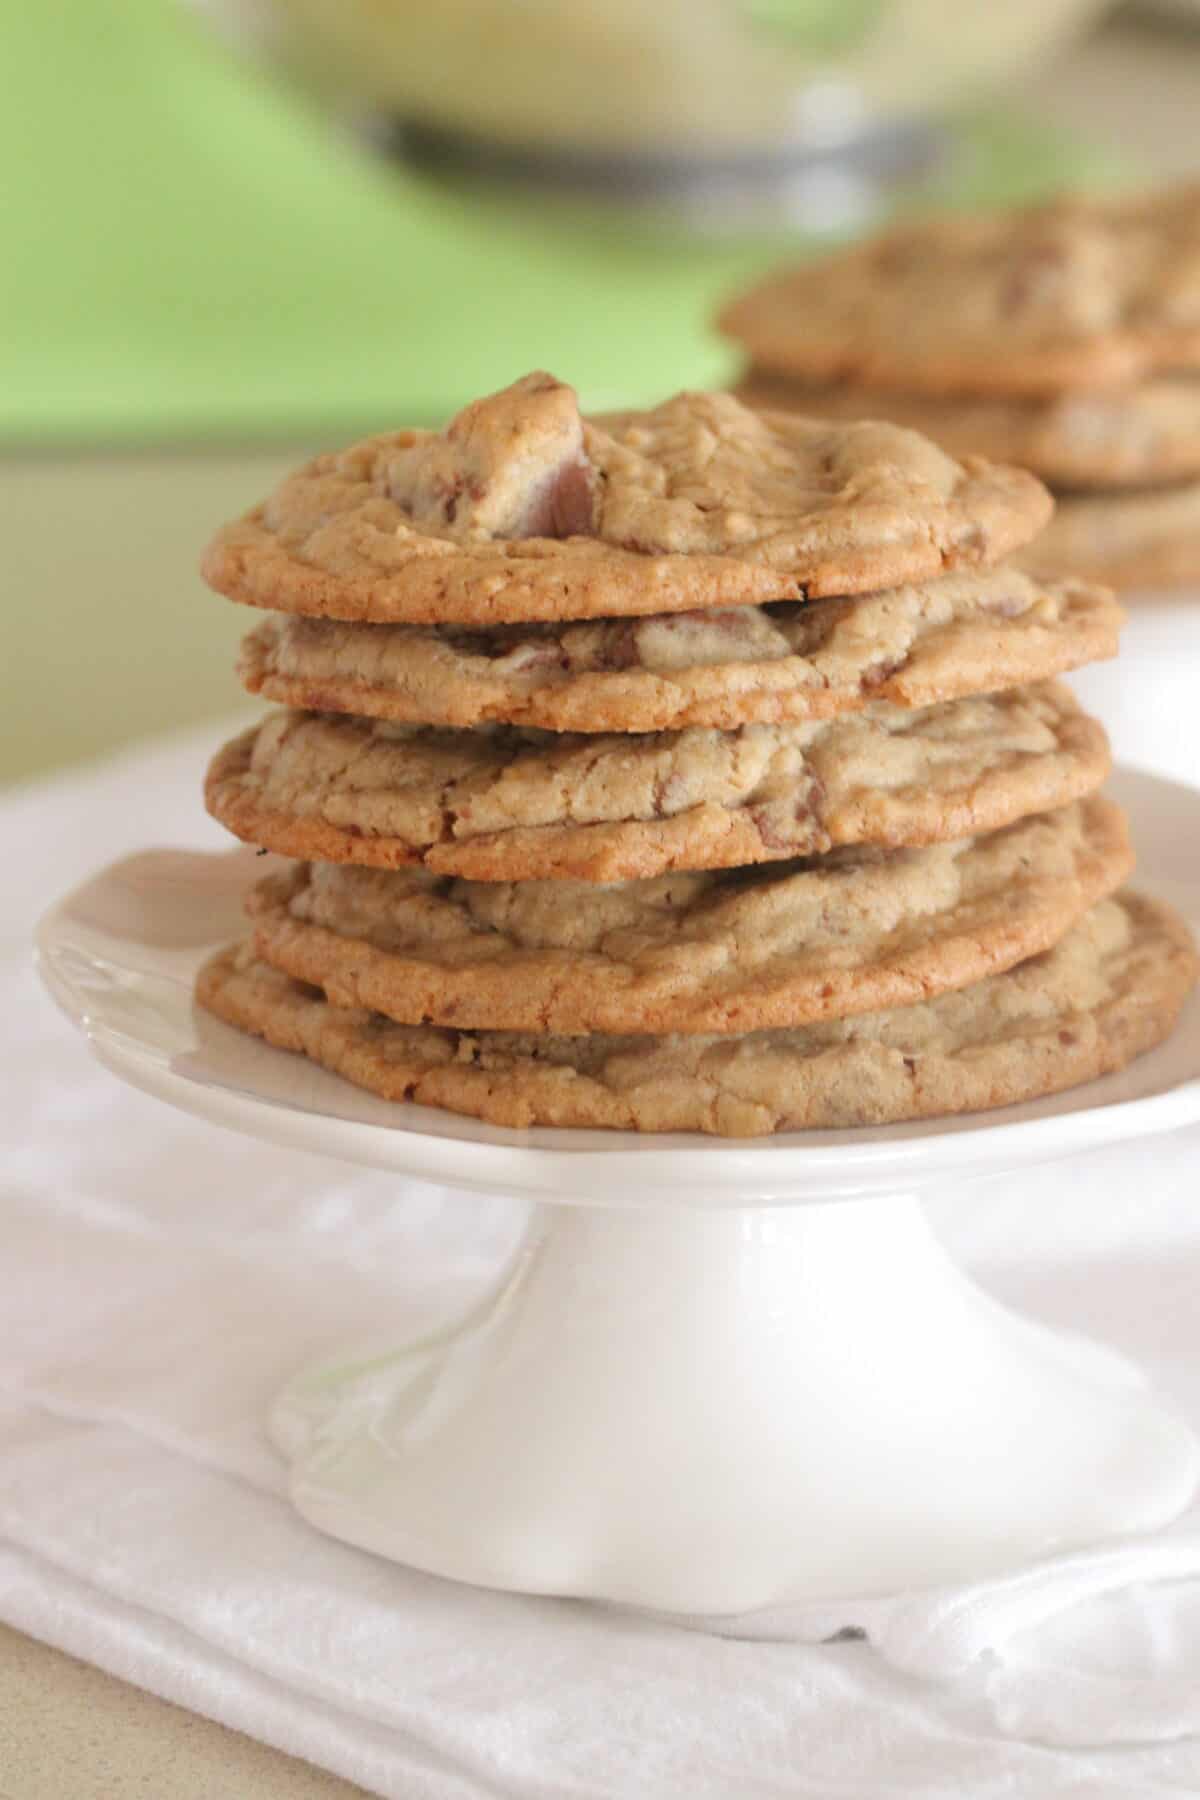 oatmeal chocolate chip cookies stacked on cake stand